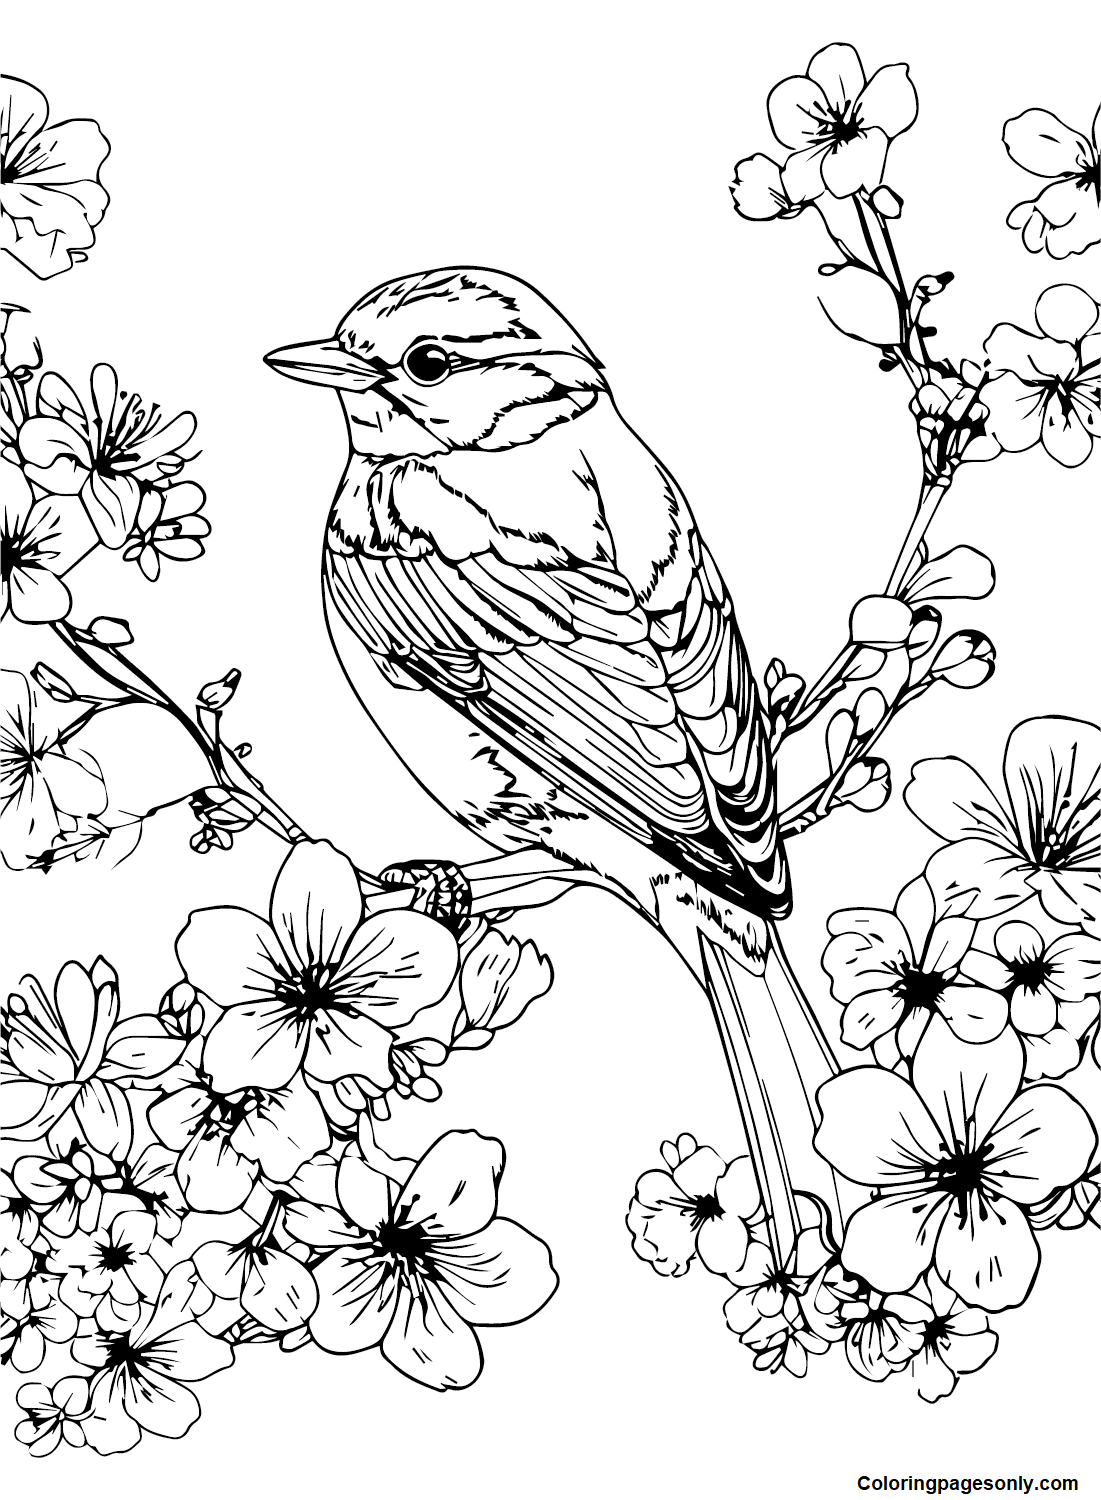 Cherry Blossom To Print Coloring Pages